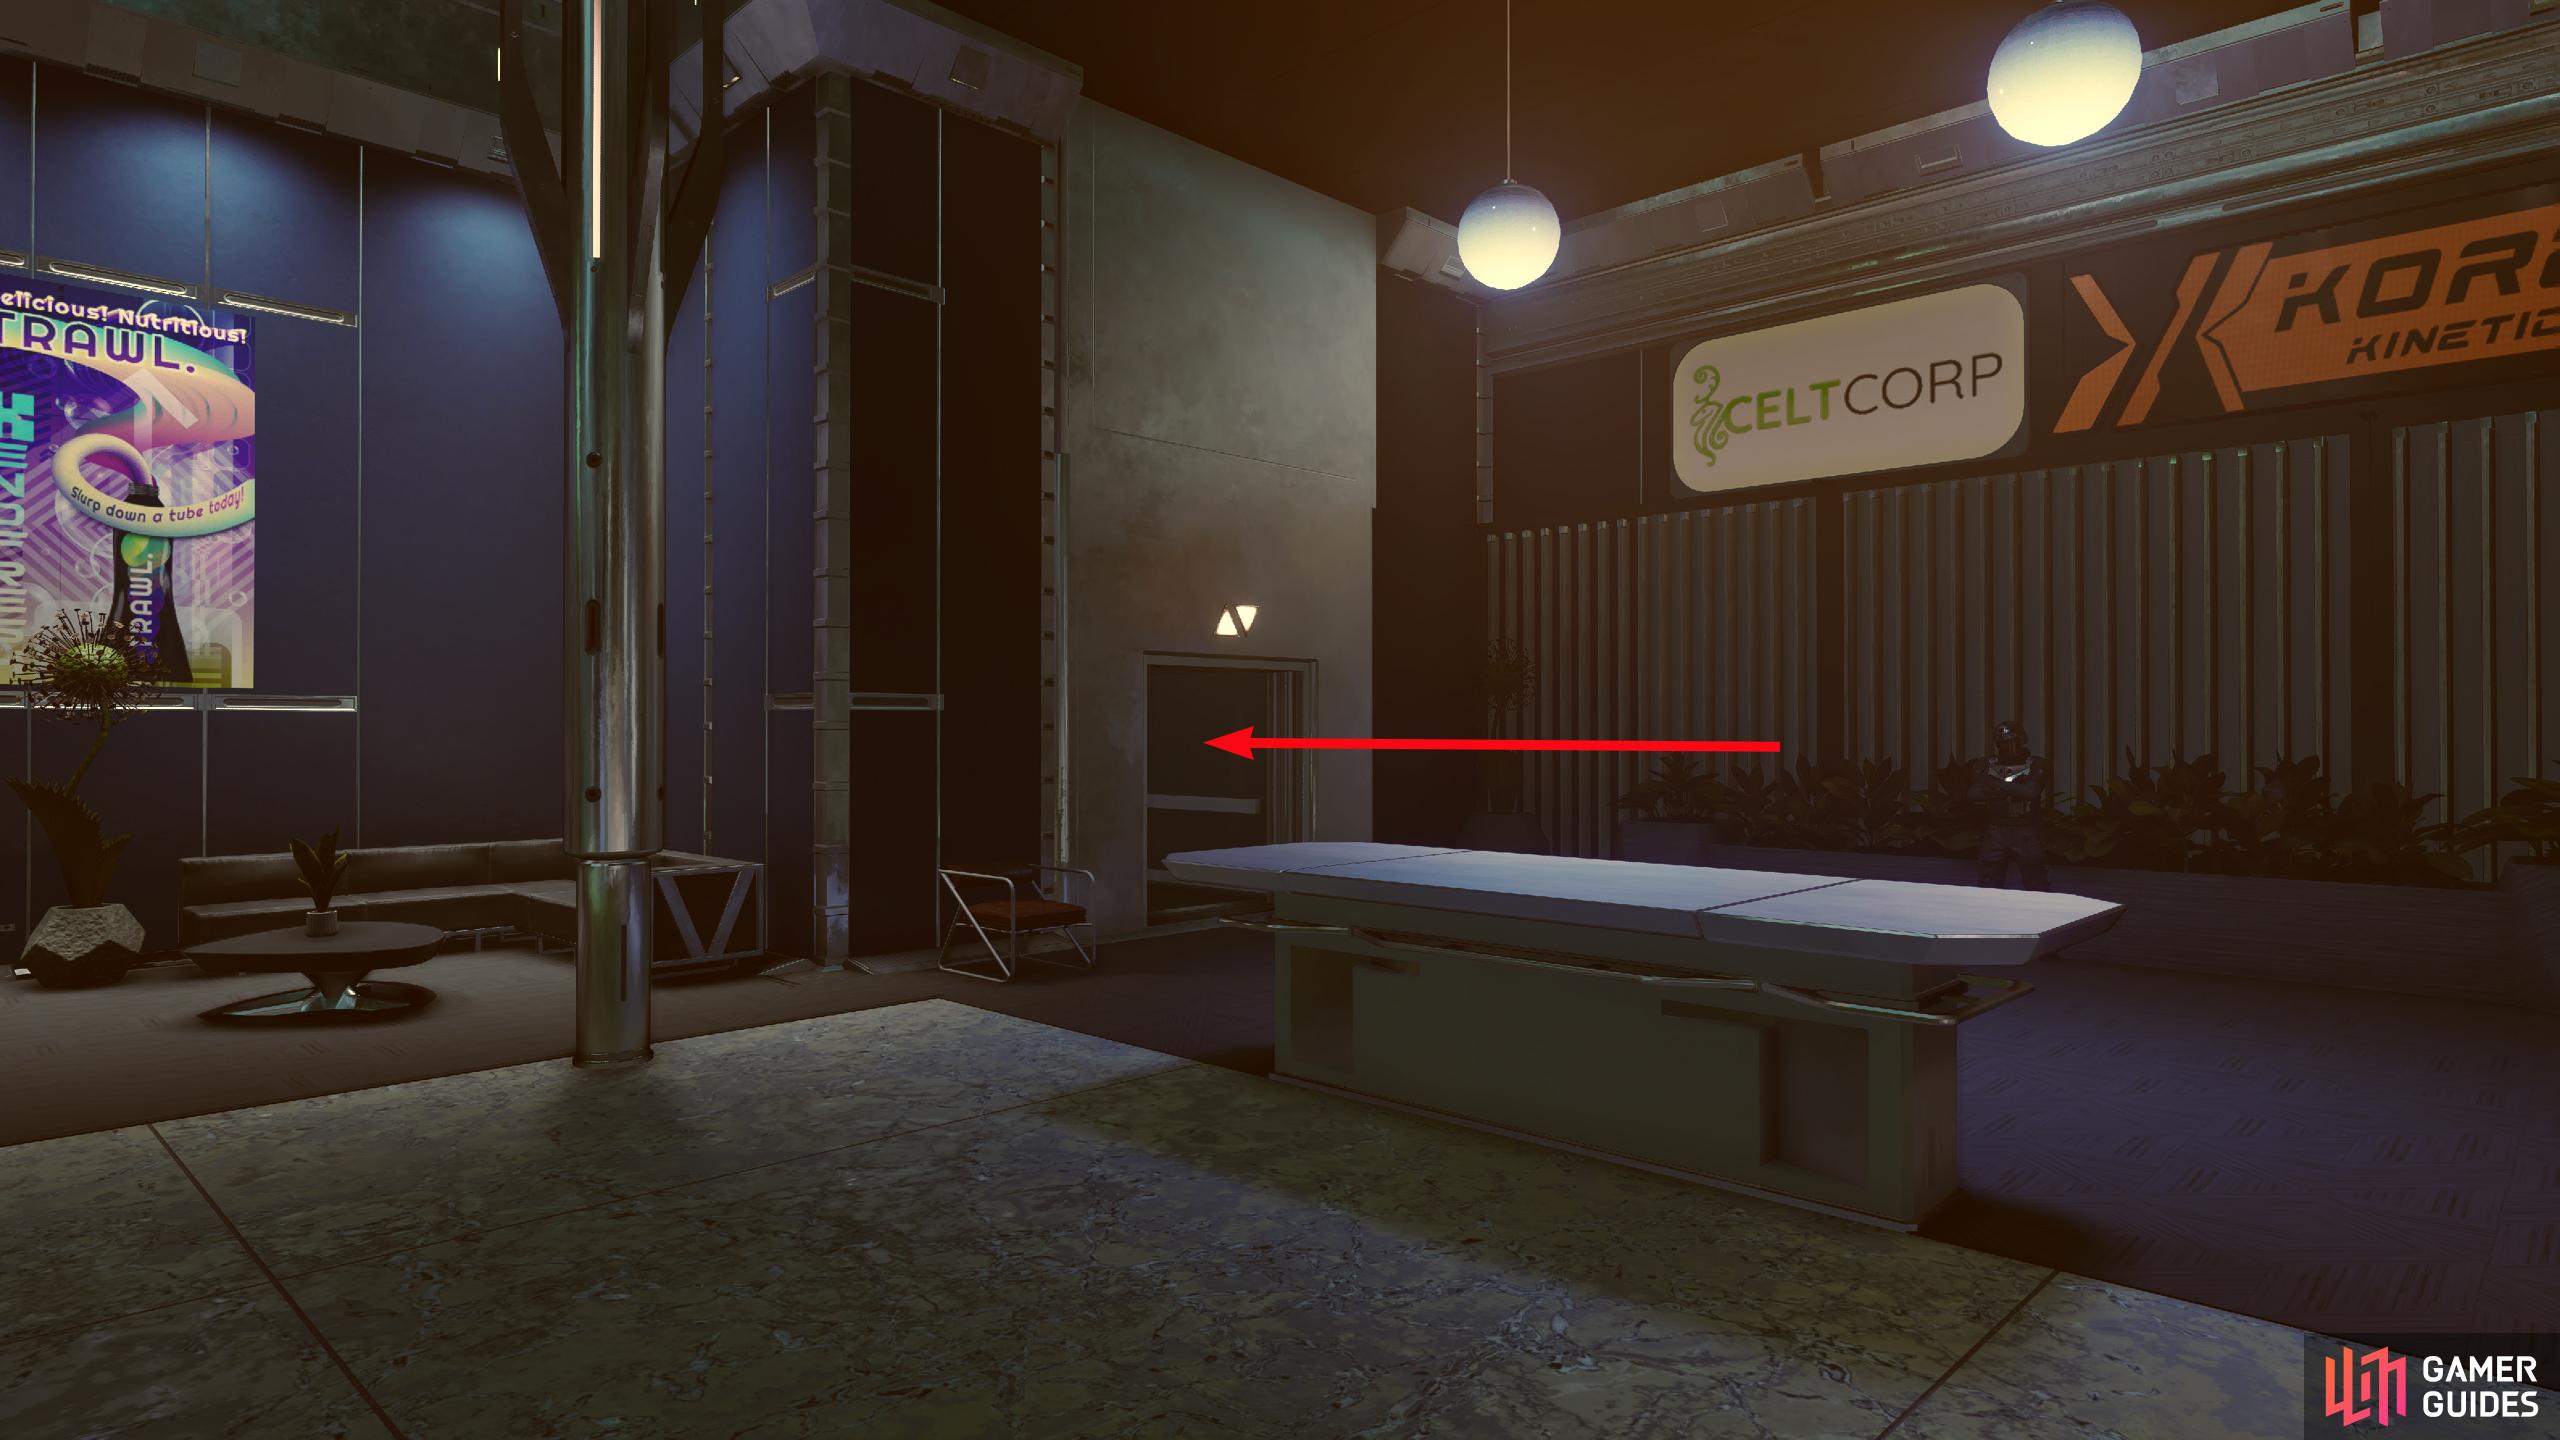 You can find the CELTCORPS floor in the Trade Tower at the opposite end of the strip to Ryujin Industries. Simply enter the elevator, and select their floor.